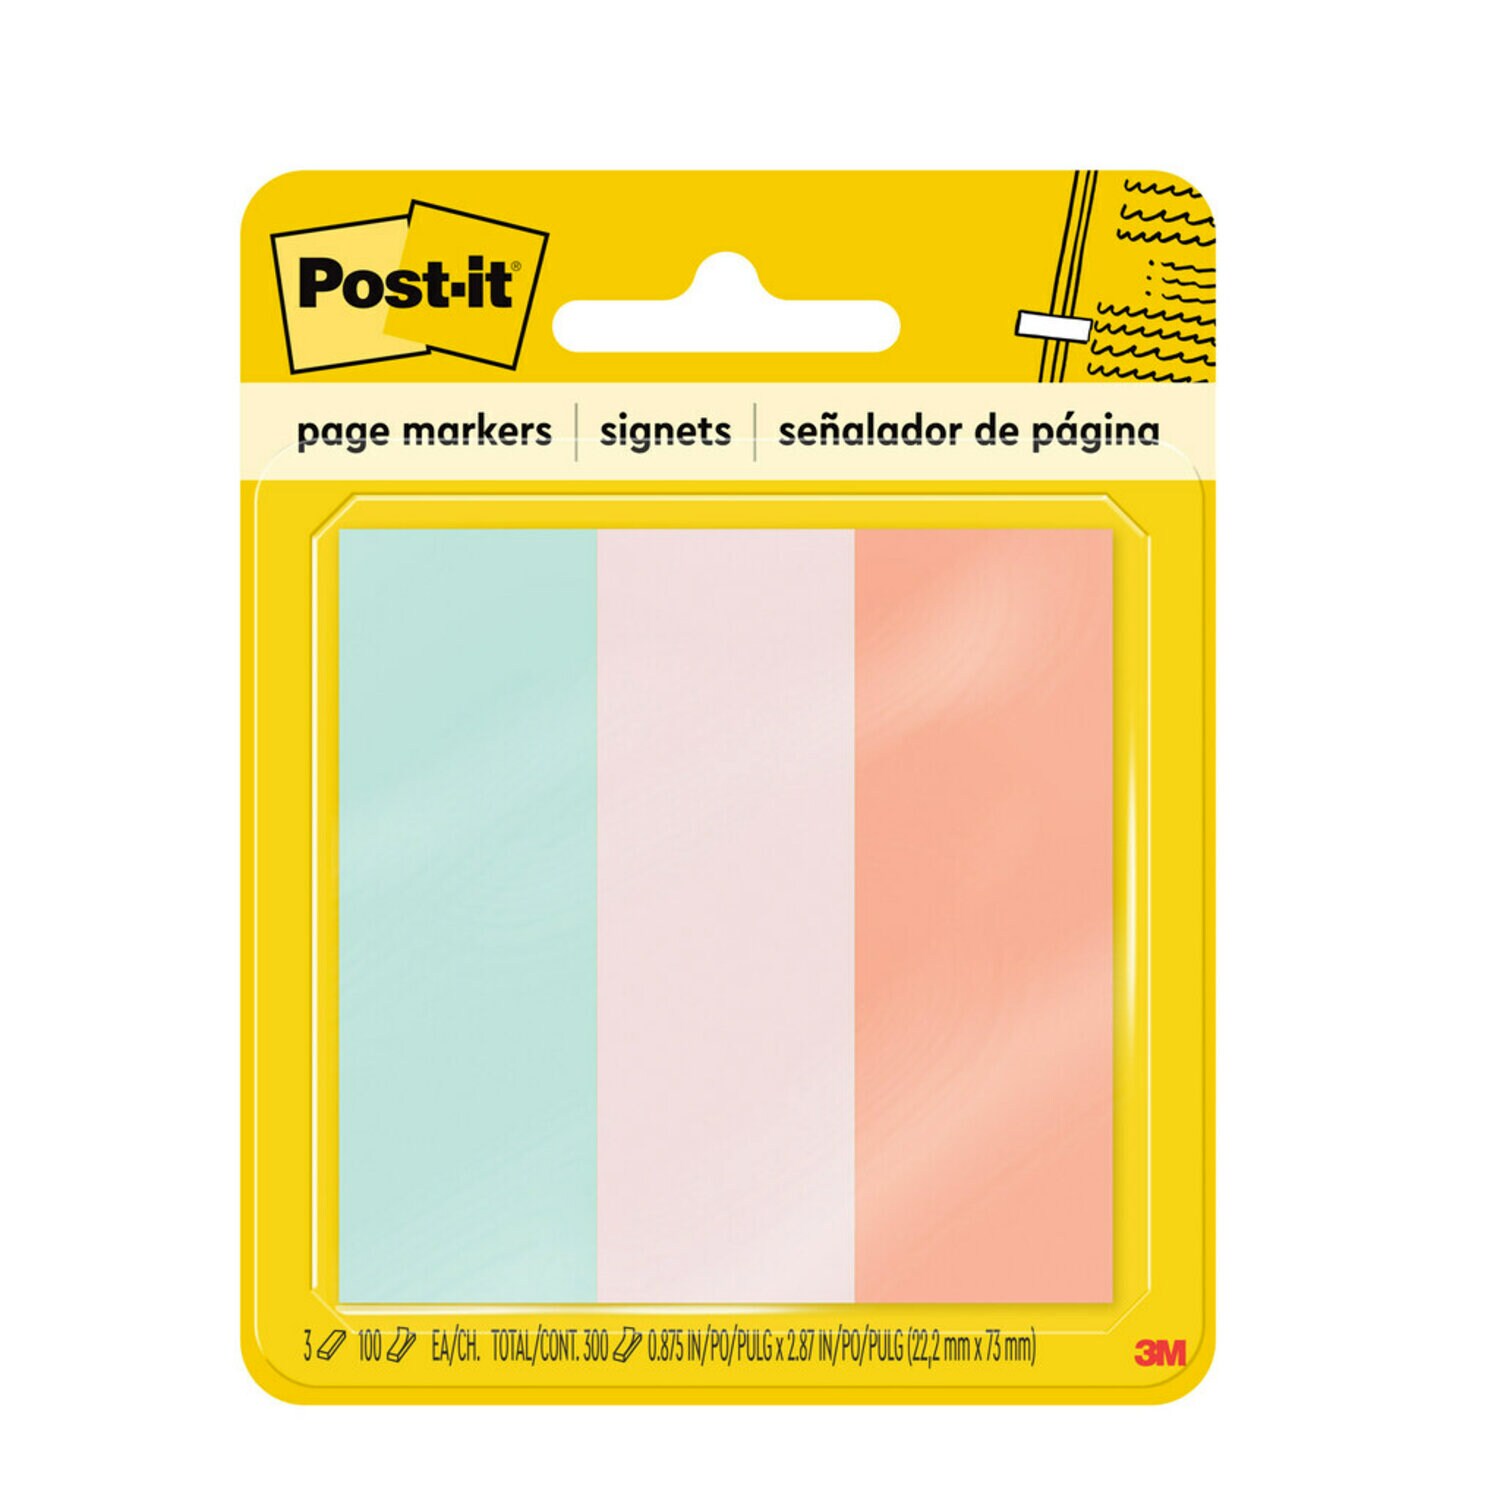 7100034056 - Post-it Page Markers 5487 7/8 in x 2-7/8 in Neon 100sht/pd, 3pd/pk